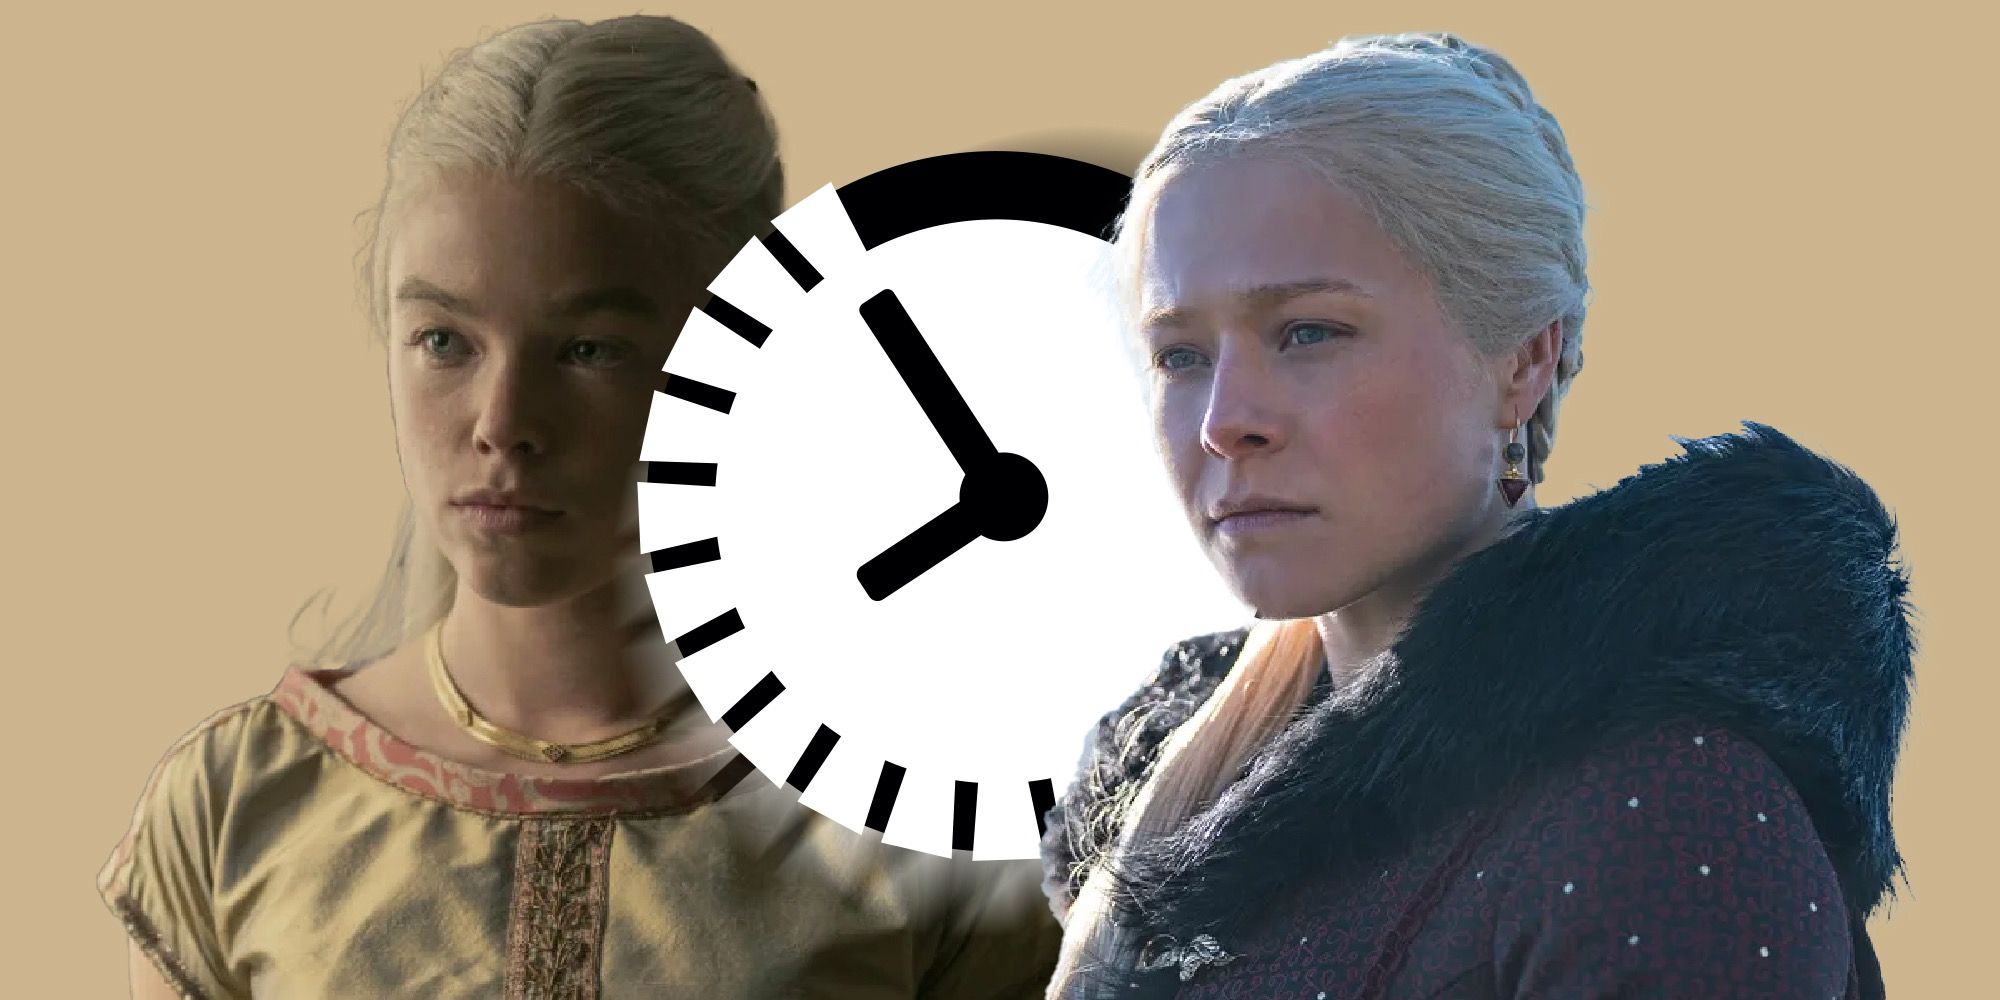 Milly Alcock's Rhaenyra and Emma D'Arcy's Rhaneyra separated by a graphic of a clock.